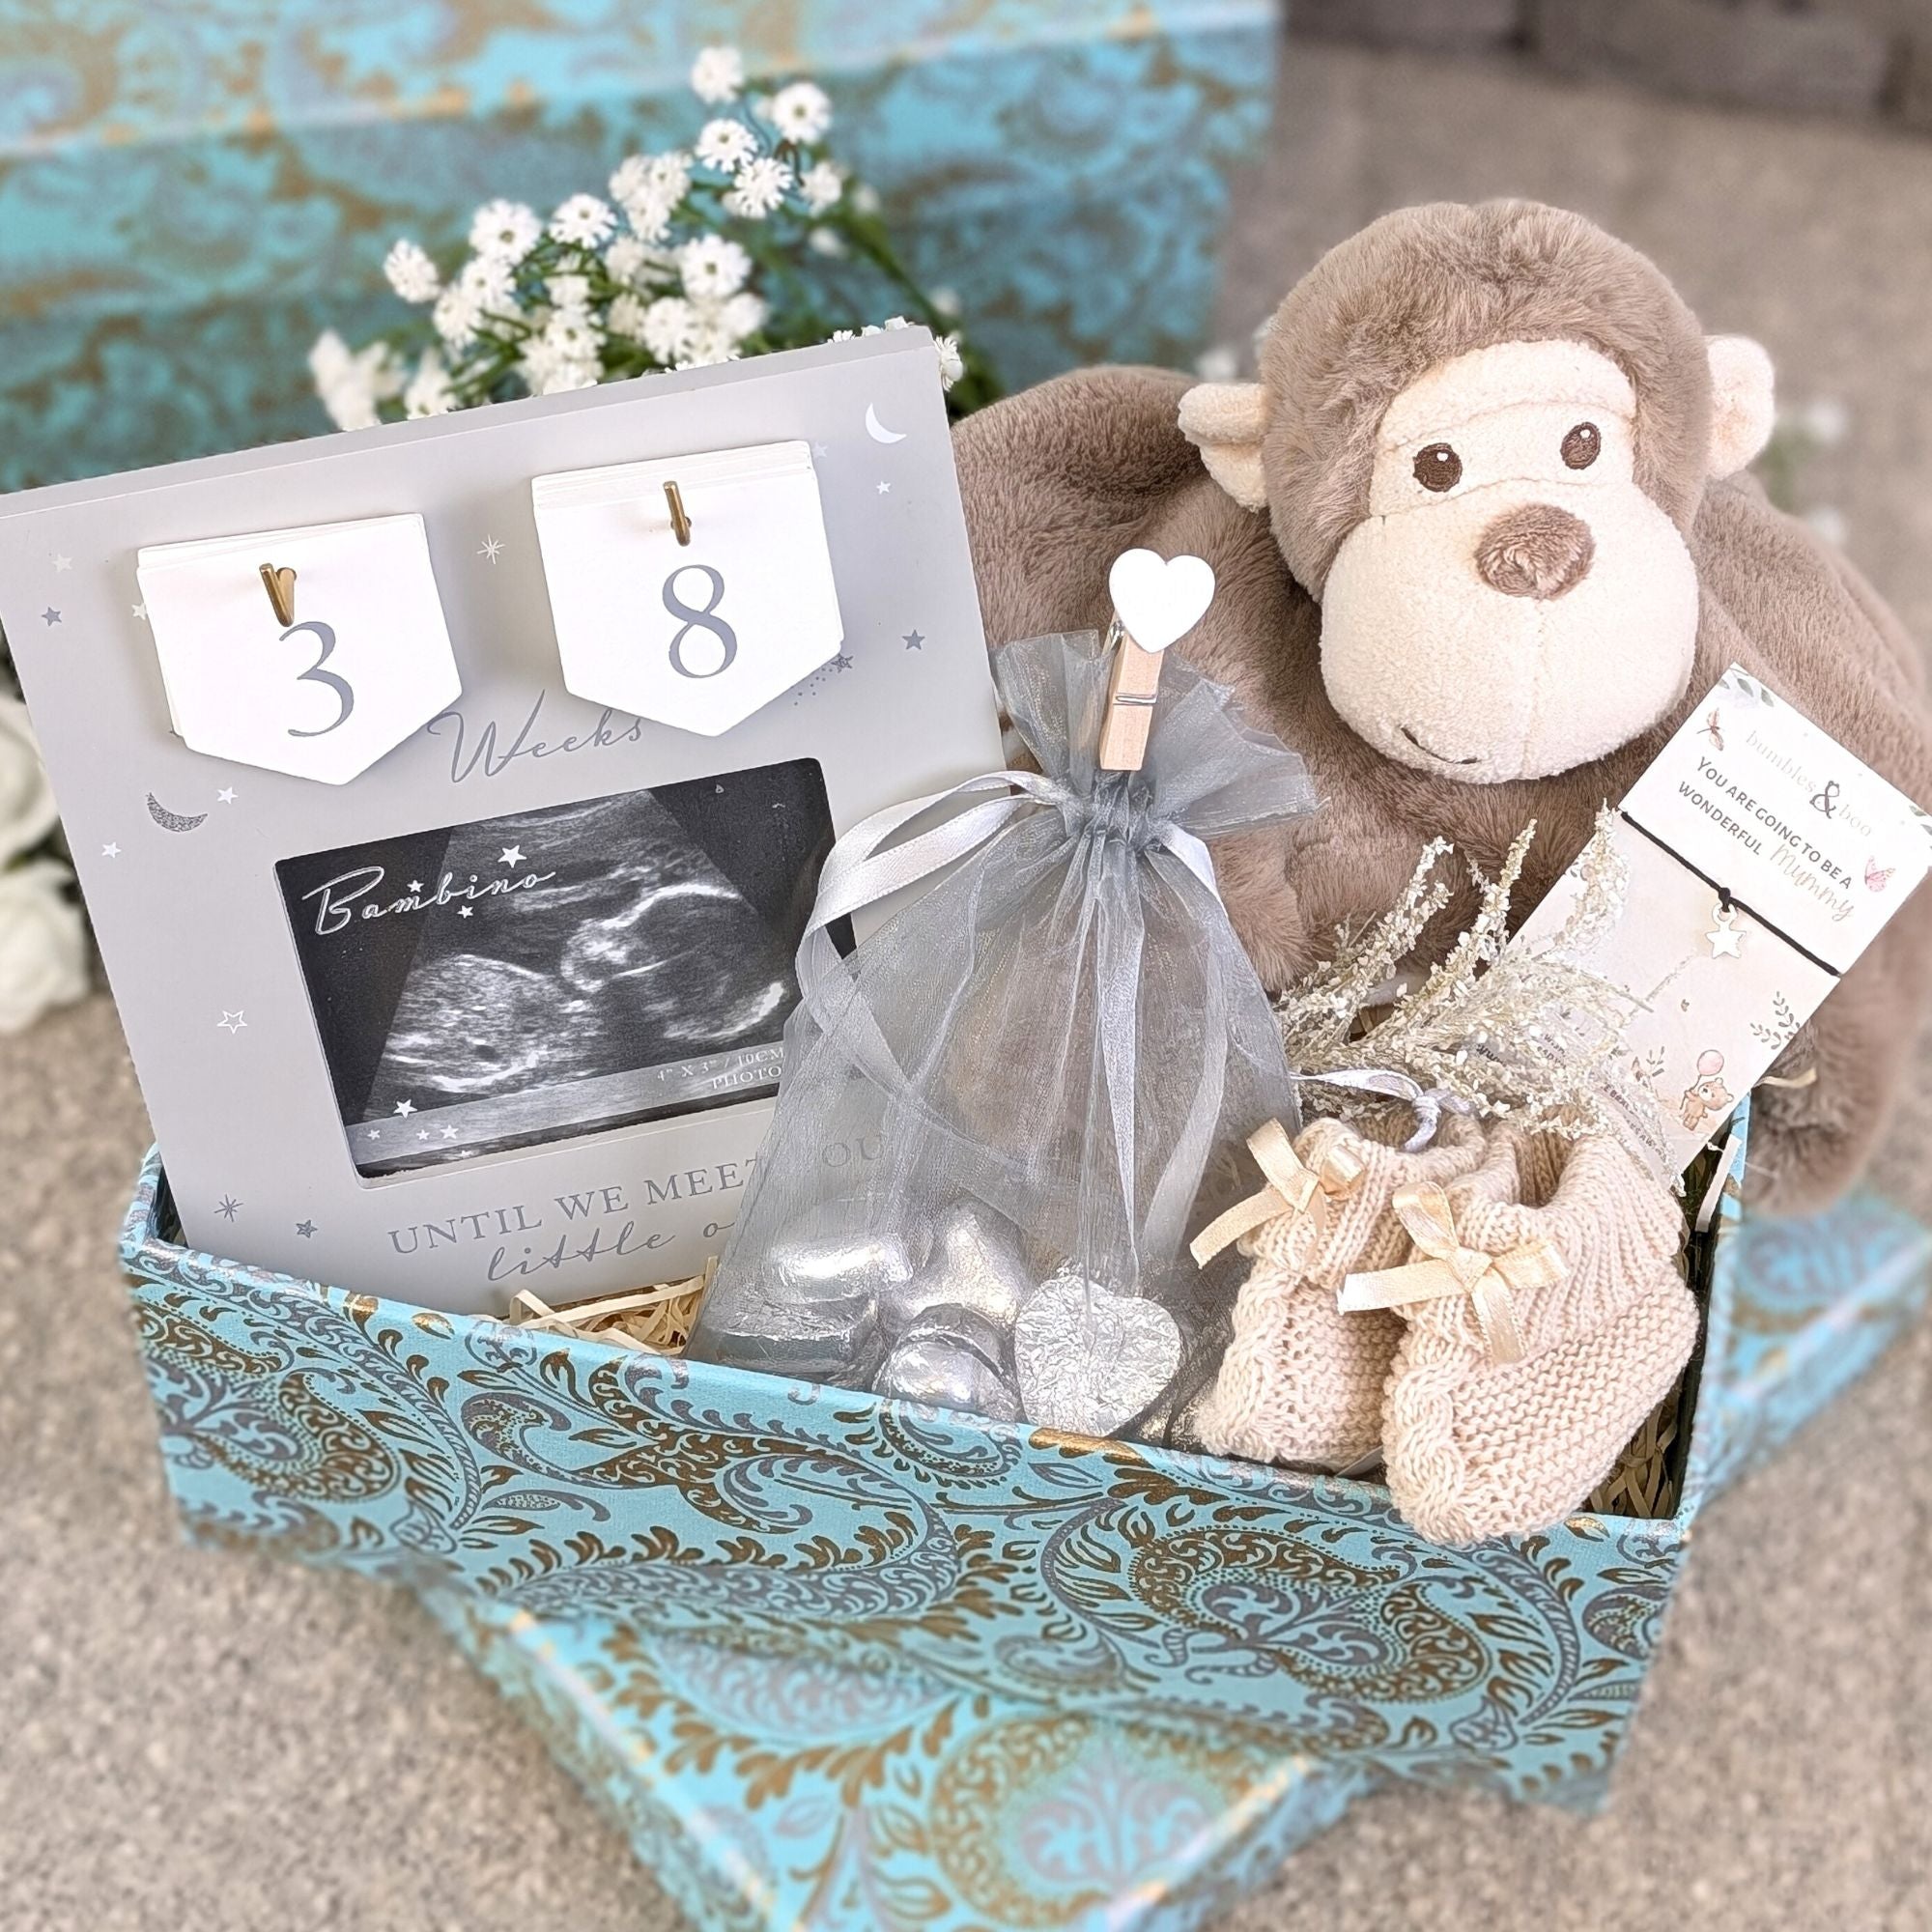 pregnancy gifts box with pregnancy countdown fram, chocolates for mum, baby booties, cheeky monkey and wish string for mum to be.